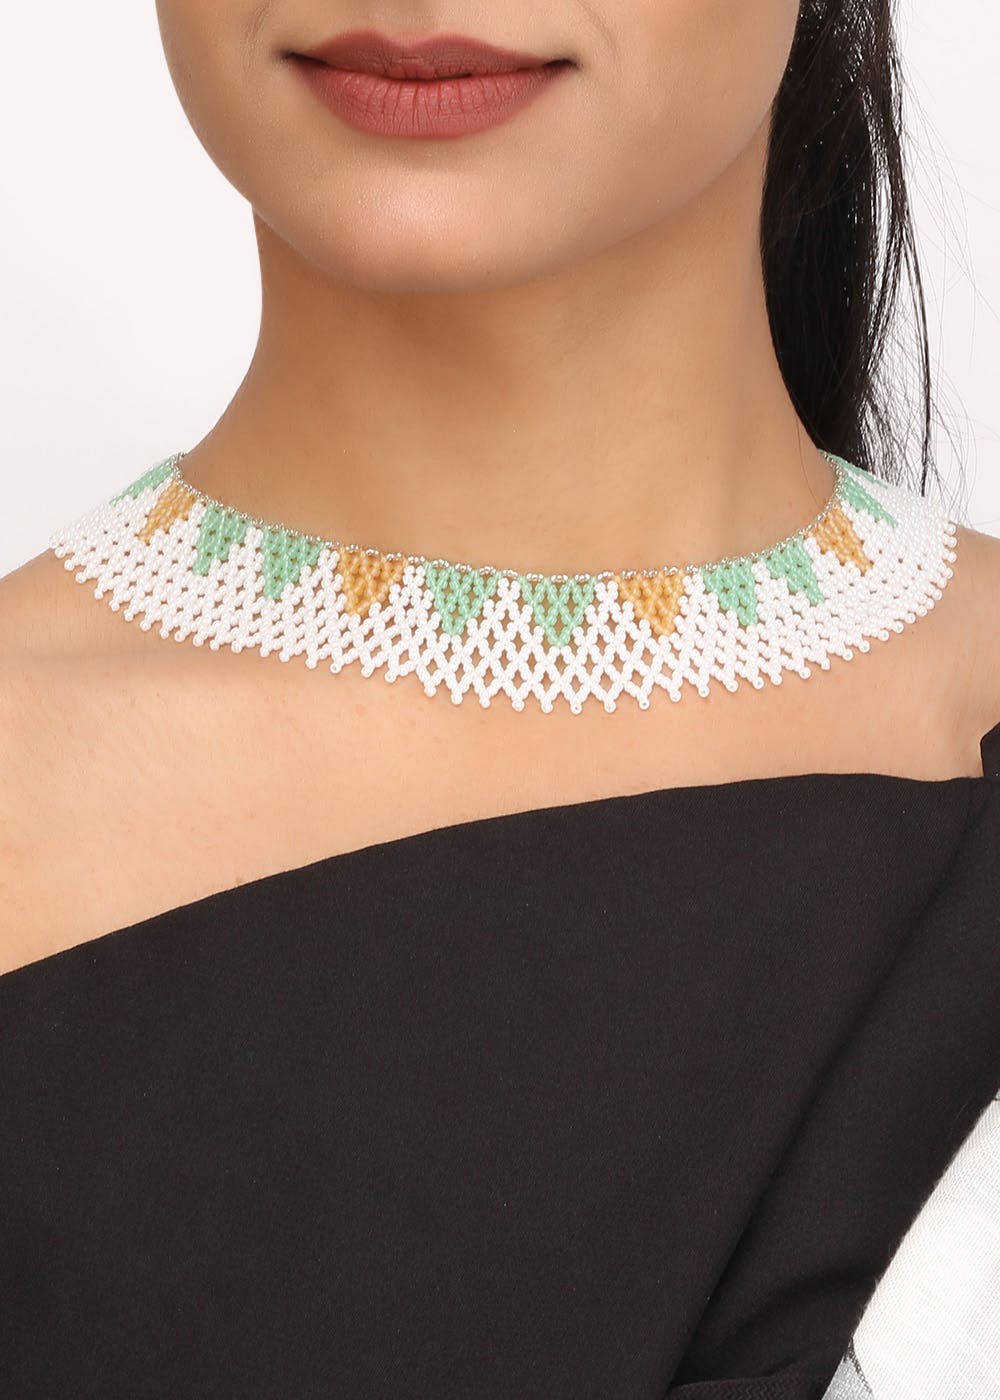 Beaded Collar Necklace · How To Make A Beaded Collar · Beadwork,  Embellishing, and Sewing on Cut Out + Keep